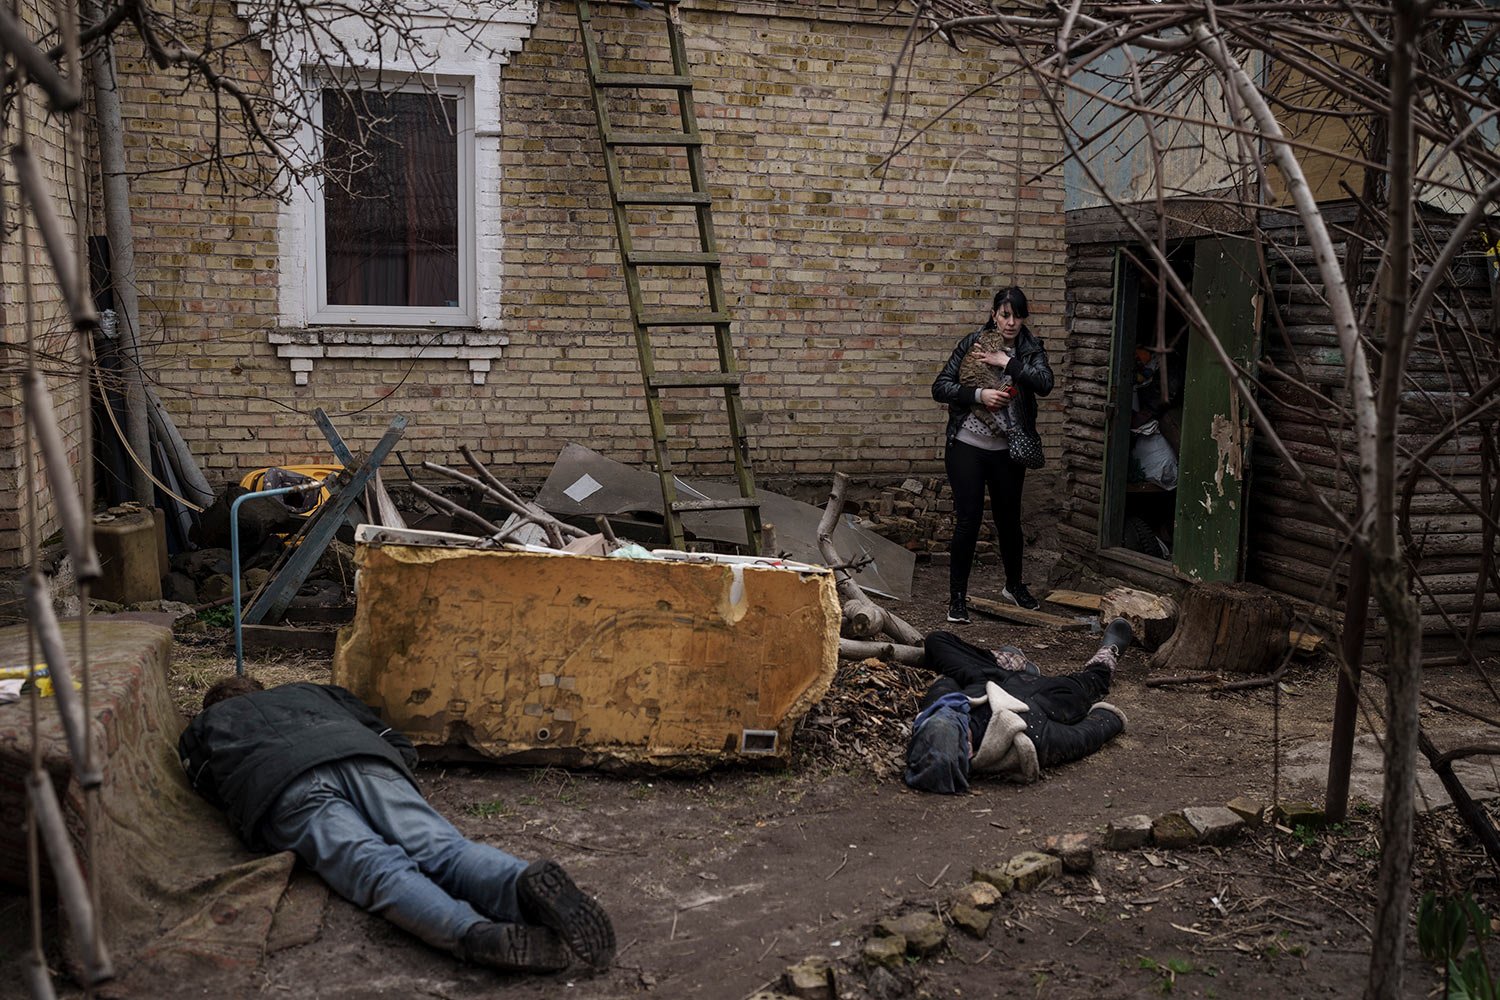  Ira Gavriluk holds her cat as she walks next to the bodies of her husband, brother and another man, who were killed outside her home in Bucha, on the outskirts of Kyiv, Ukraine, Monday, April 4, 2022. (AP Photo/Felipe Dana)  